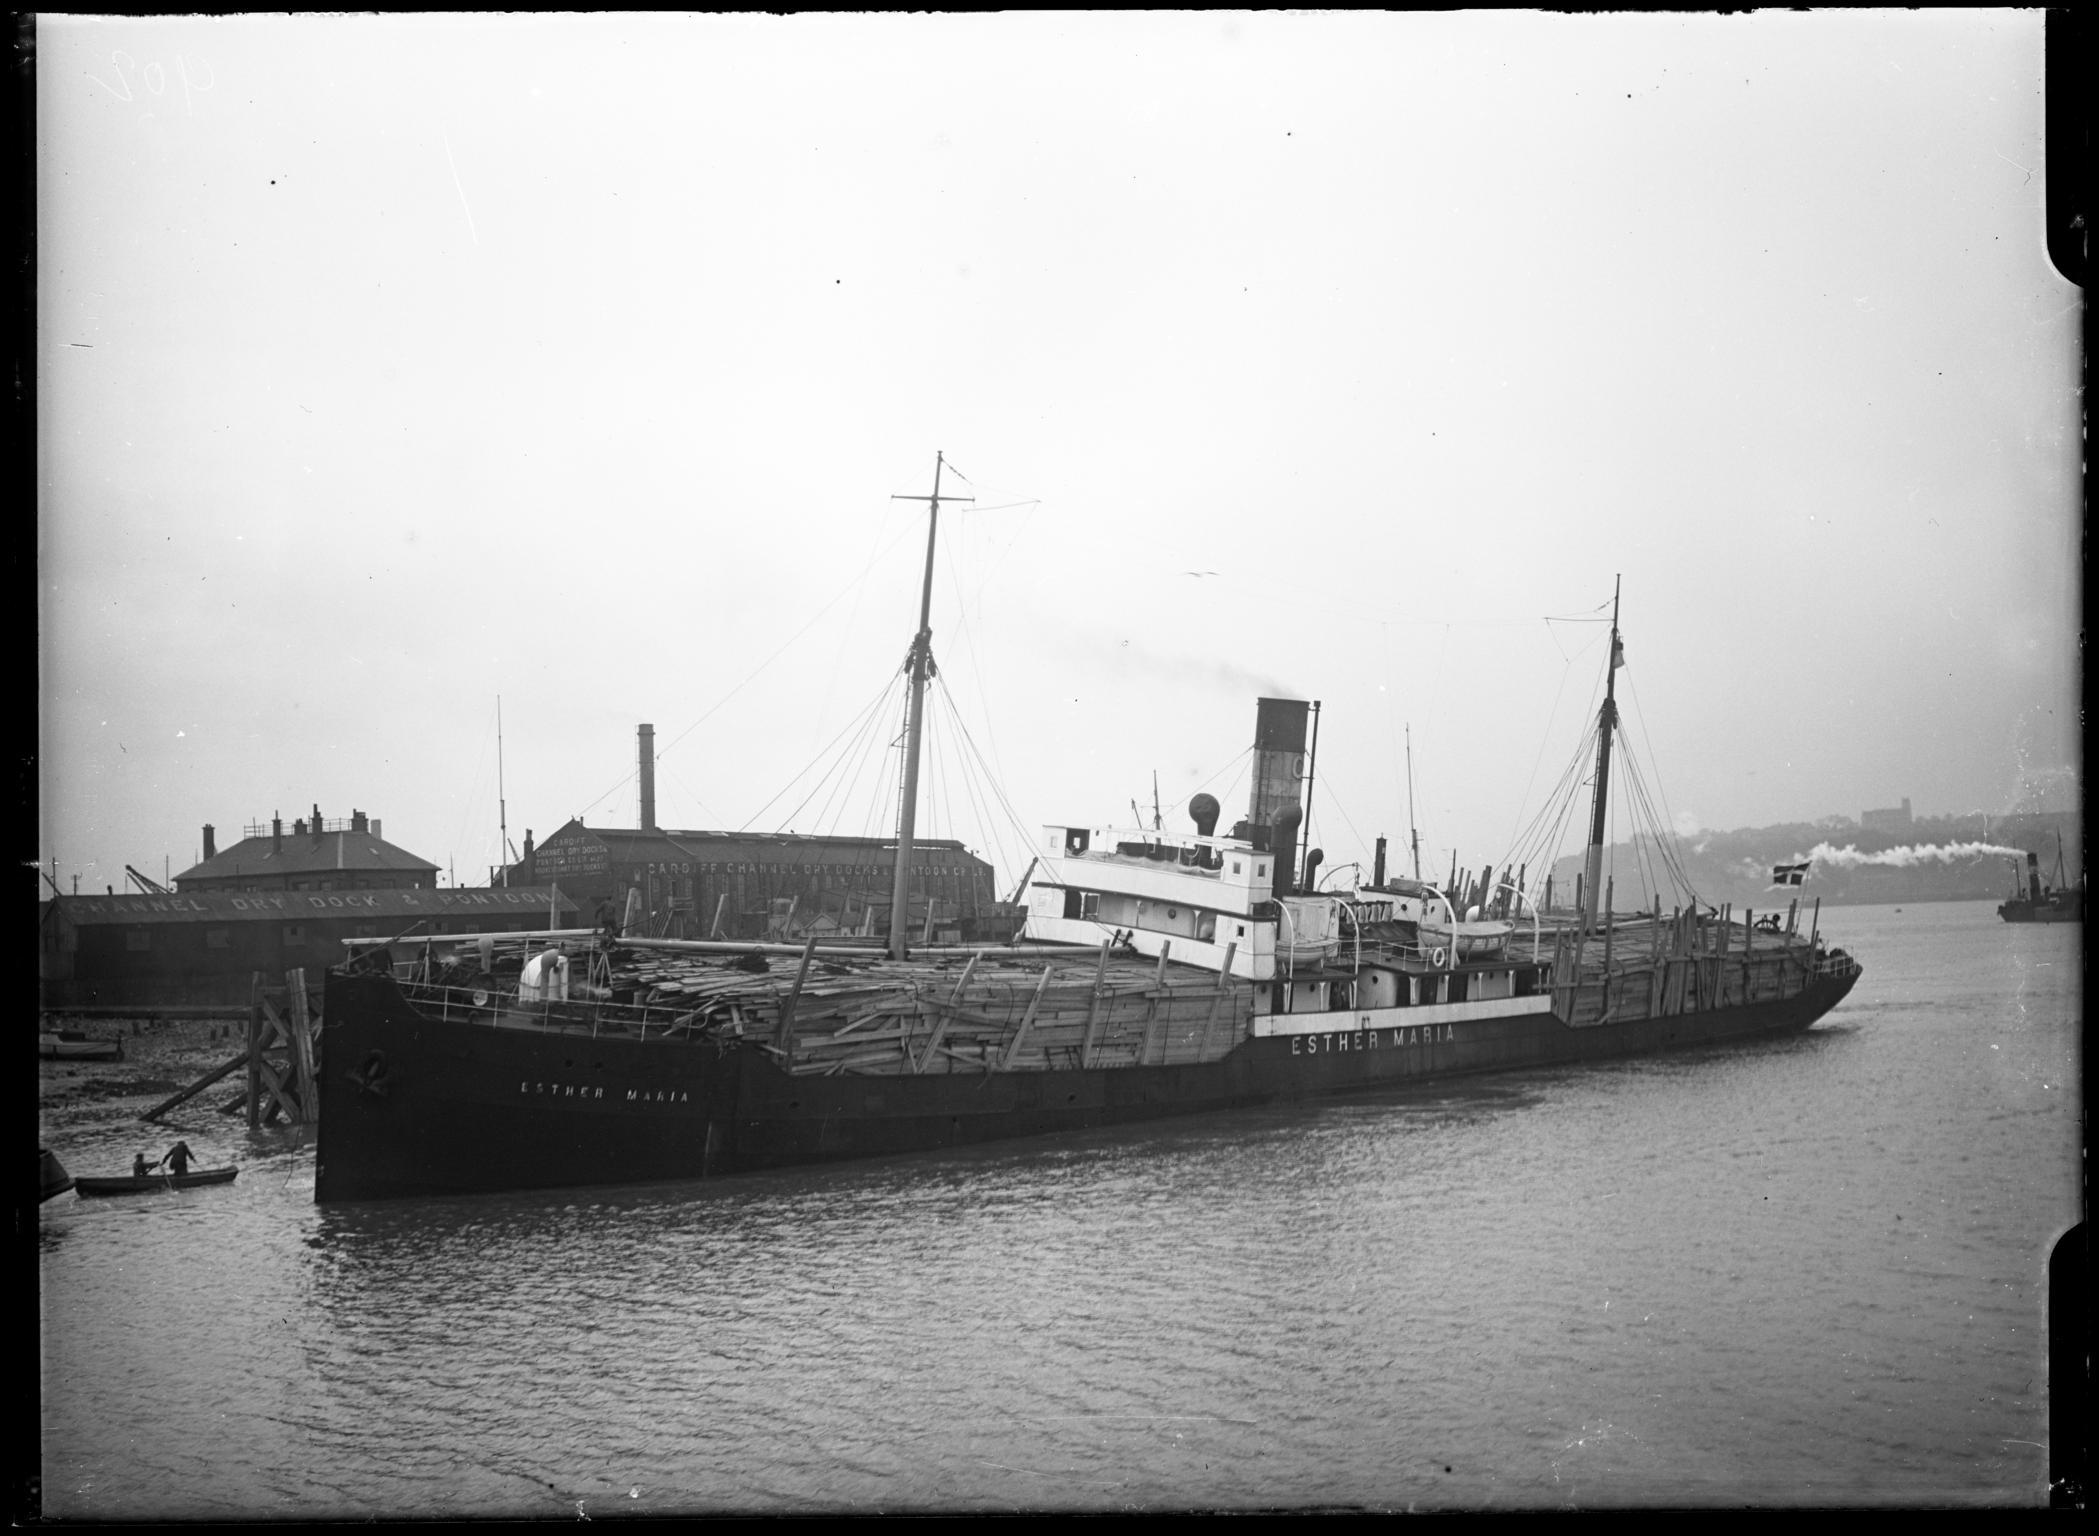 S.S. ESTHER MARIA, glass negative